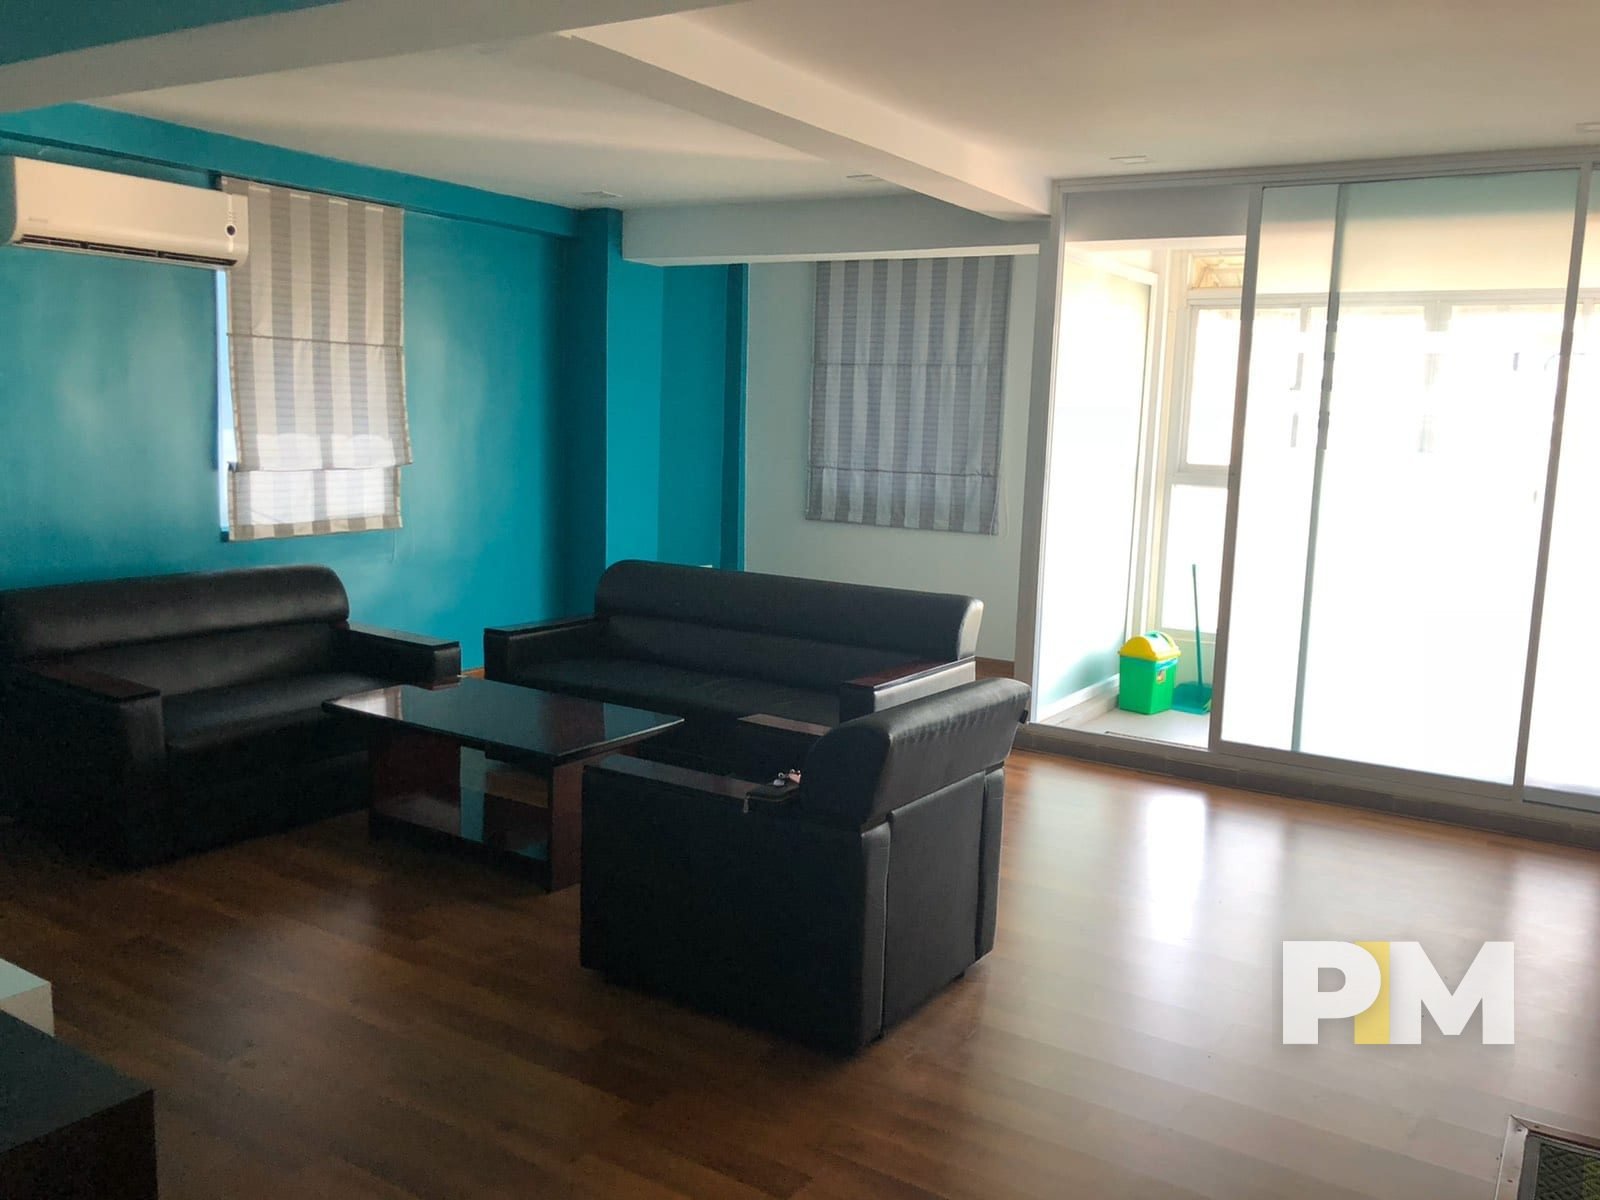 living room in apartment for rent in yangon